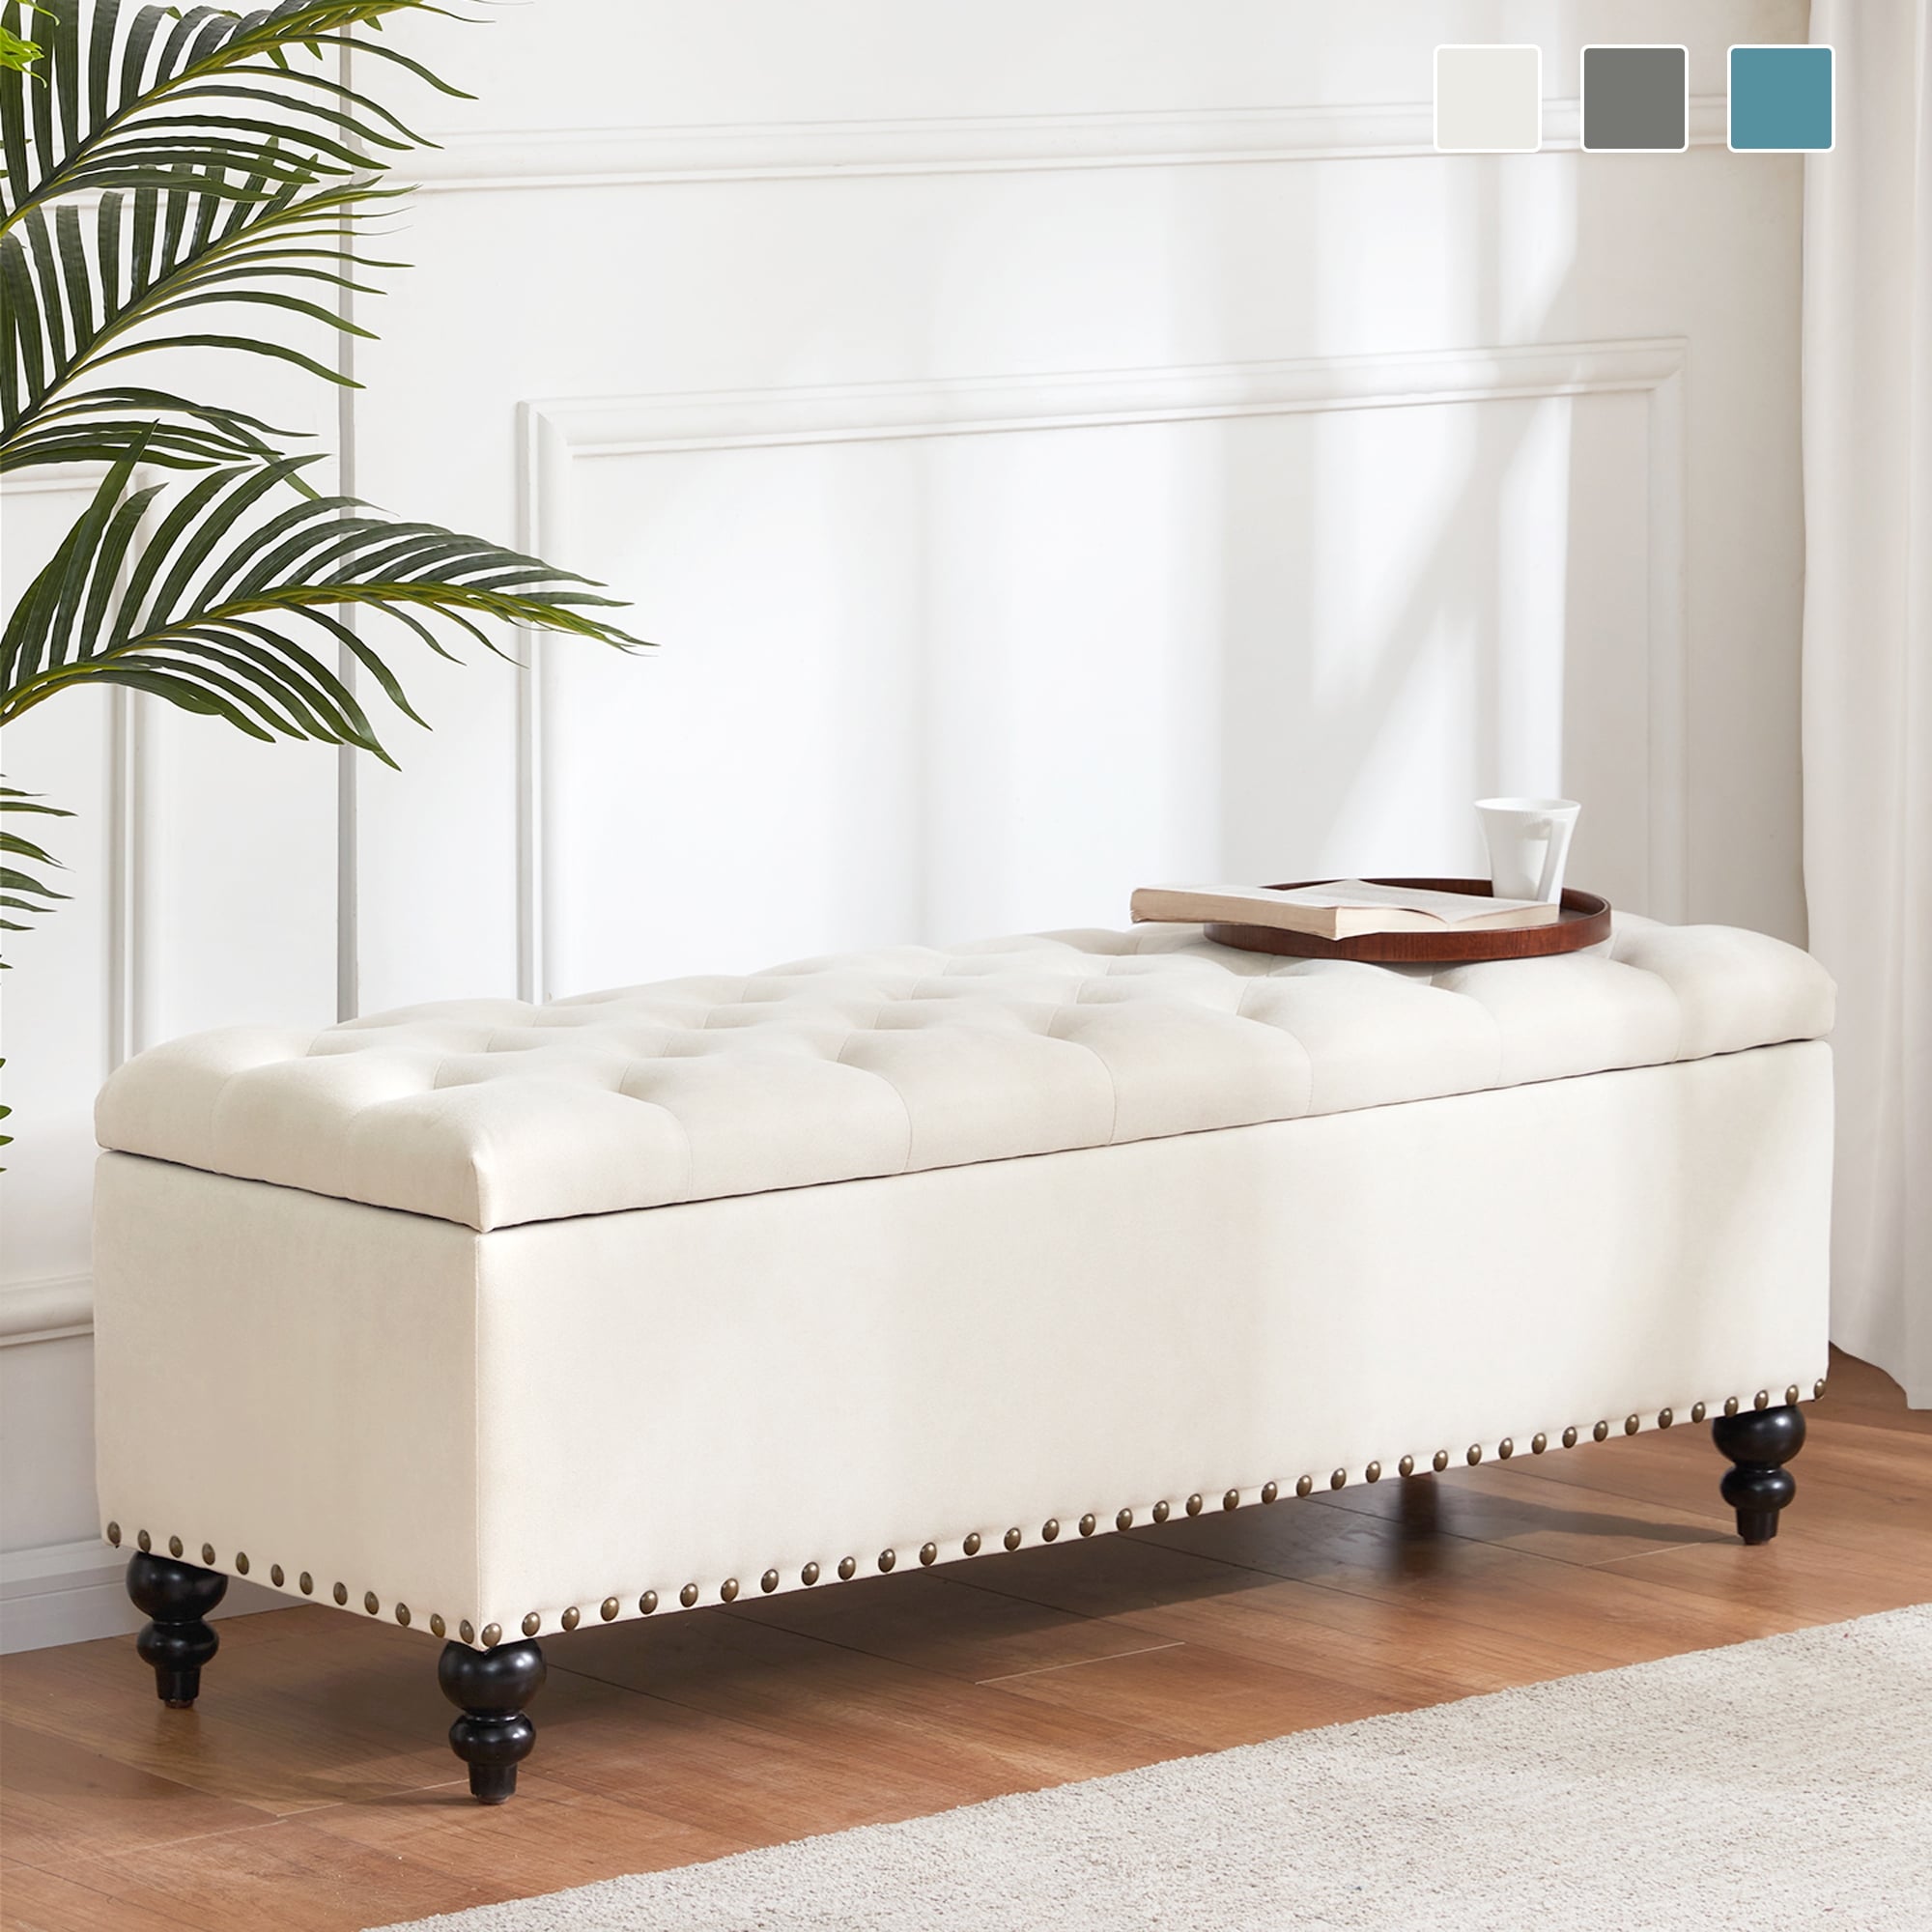 HUIMO Button-Tufted Storage Bench for Bedroom 50.3"W x 17.5"D x 18"H Bottom rivets design